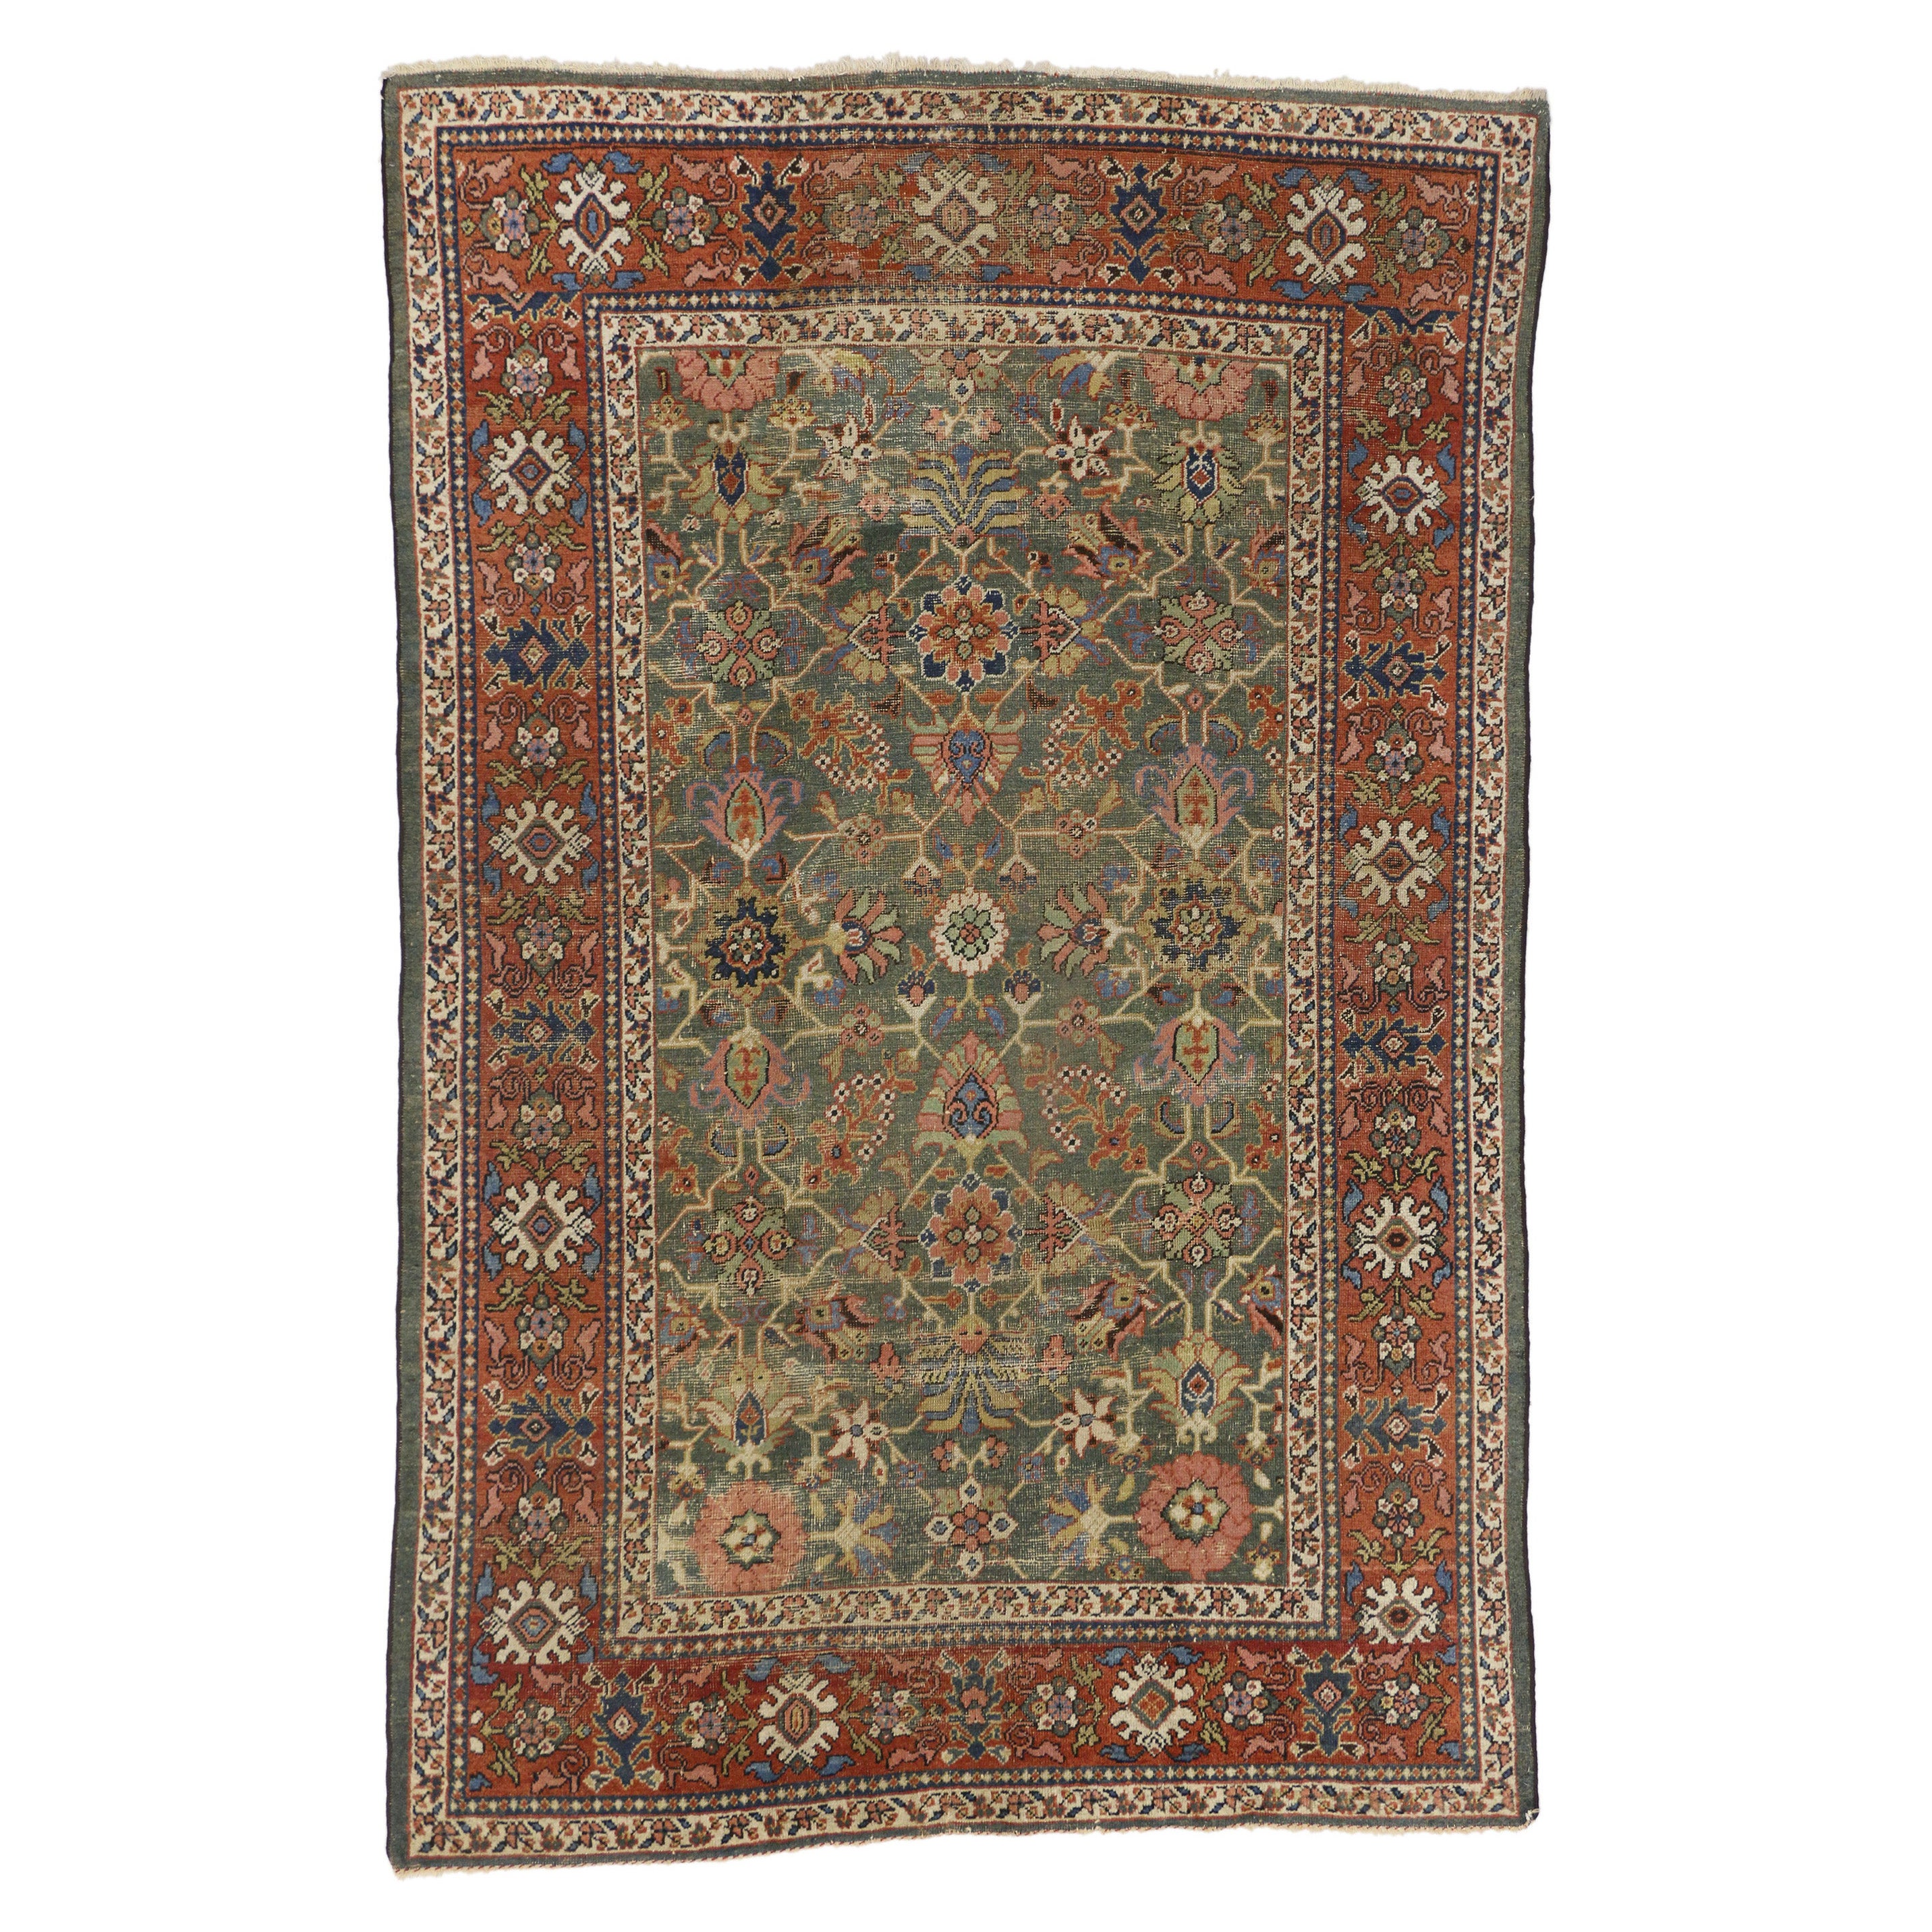 Distressed Antique Persian Sultanabad Rug with Rustic Arts and Crafts Style